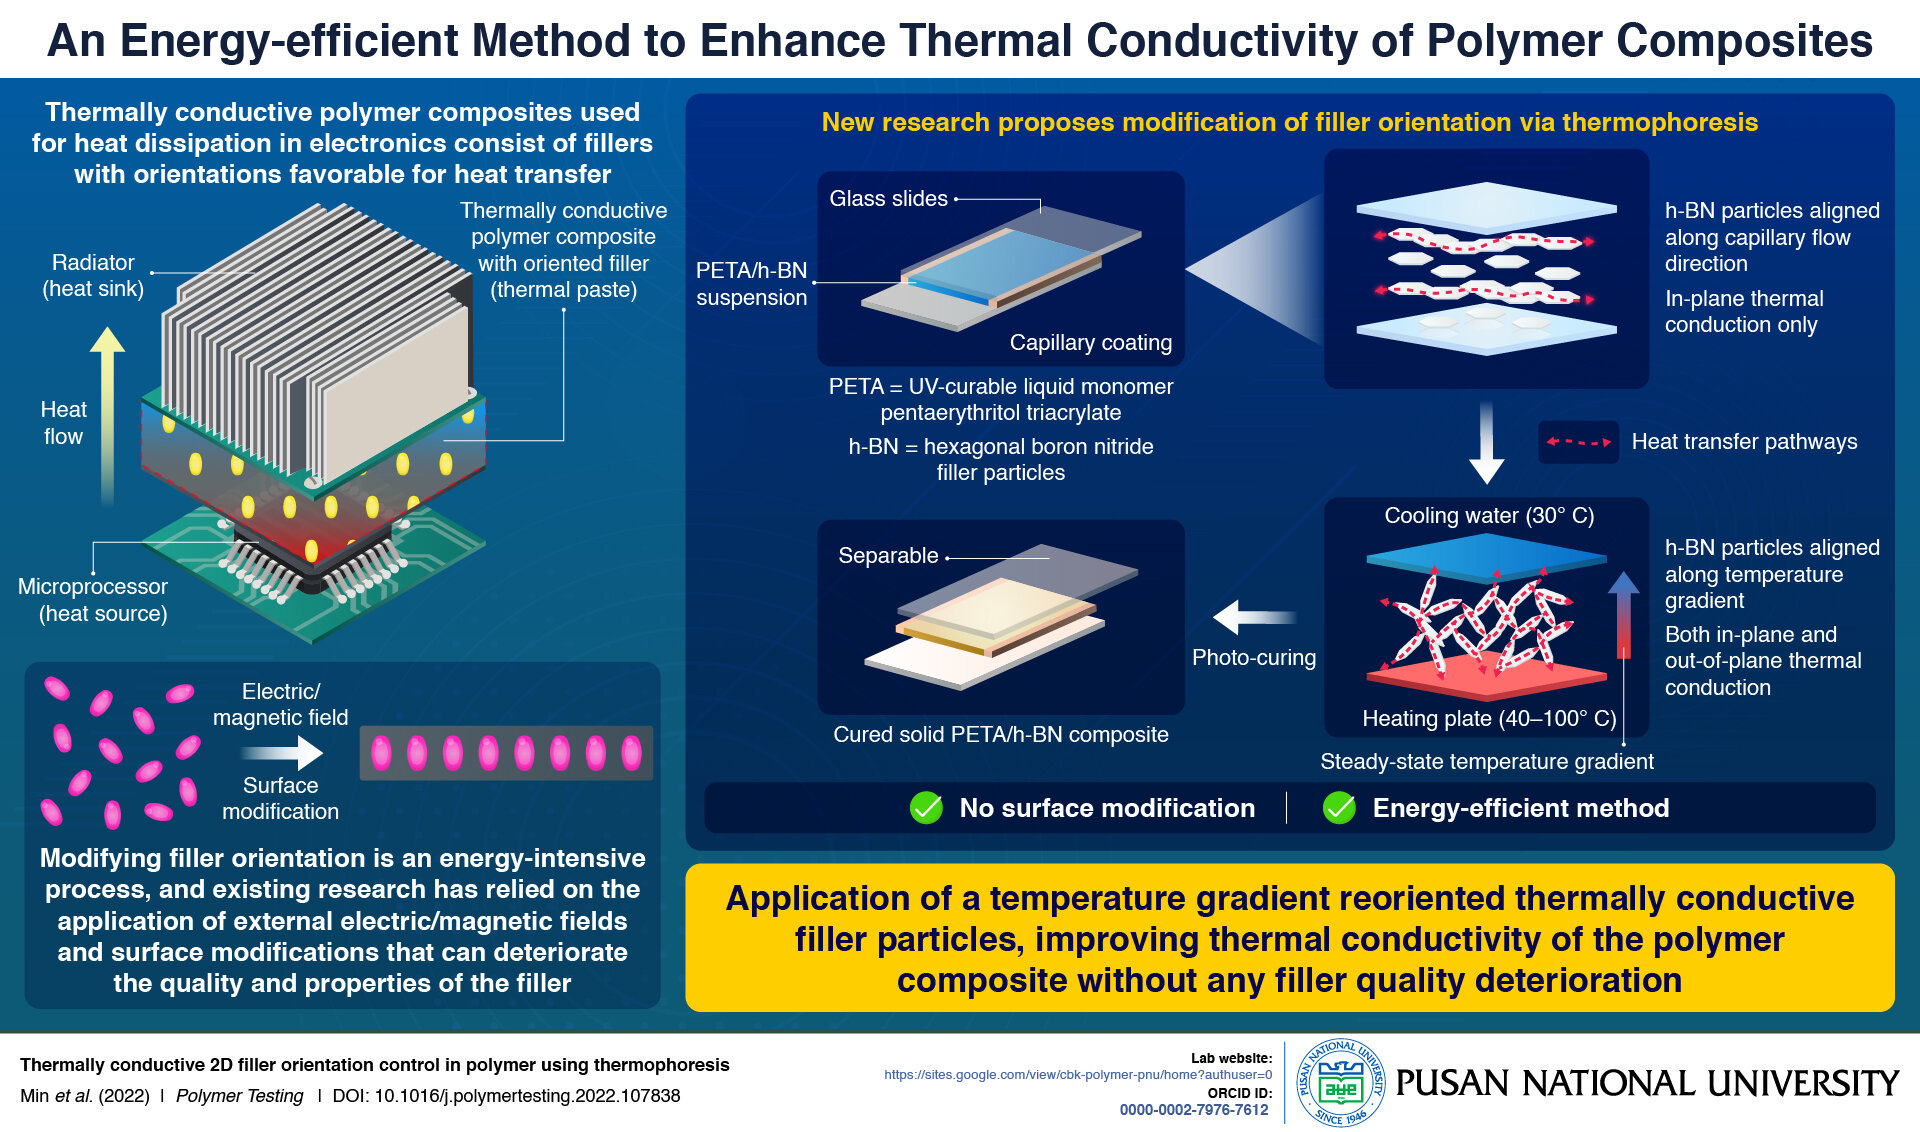 #An energy-efficient method to enhance thermal conductivity of polymer composites